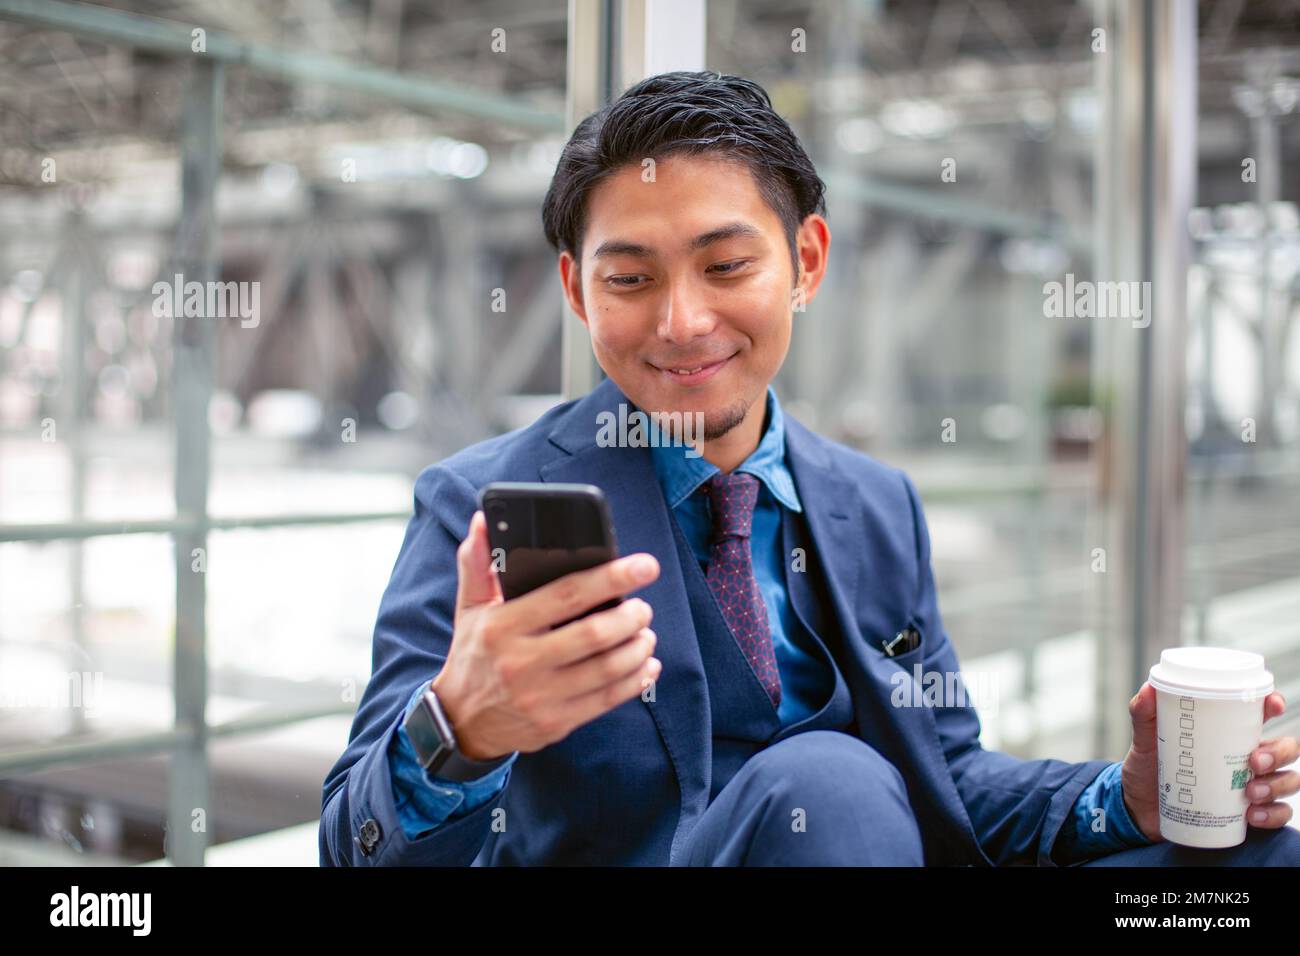 A young businessman in a blue suit in a city, looking at his mobile phone screen, texting or reading a message. Stock Photo